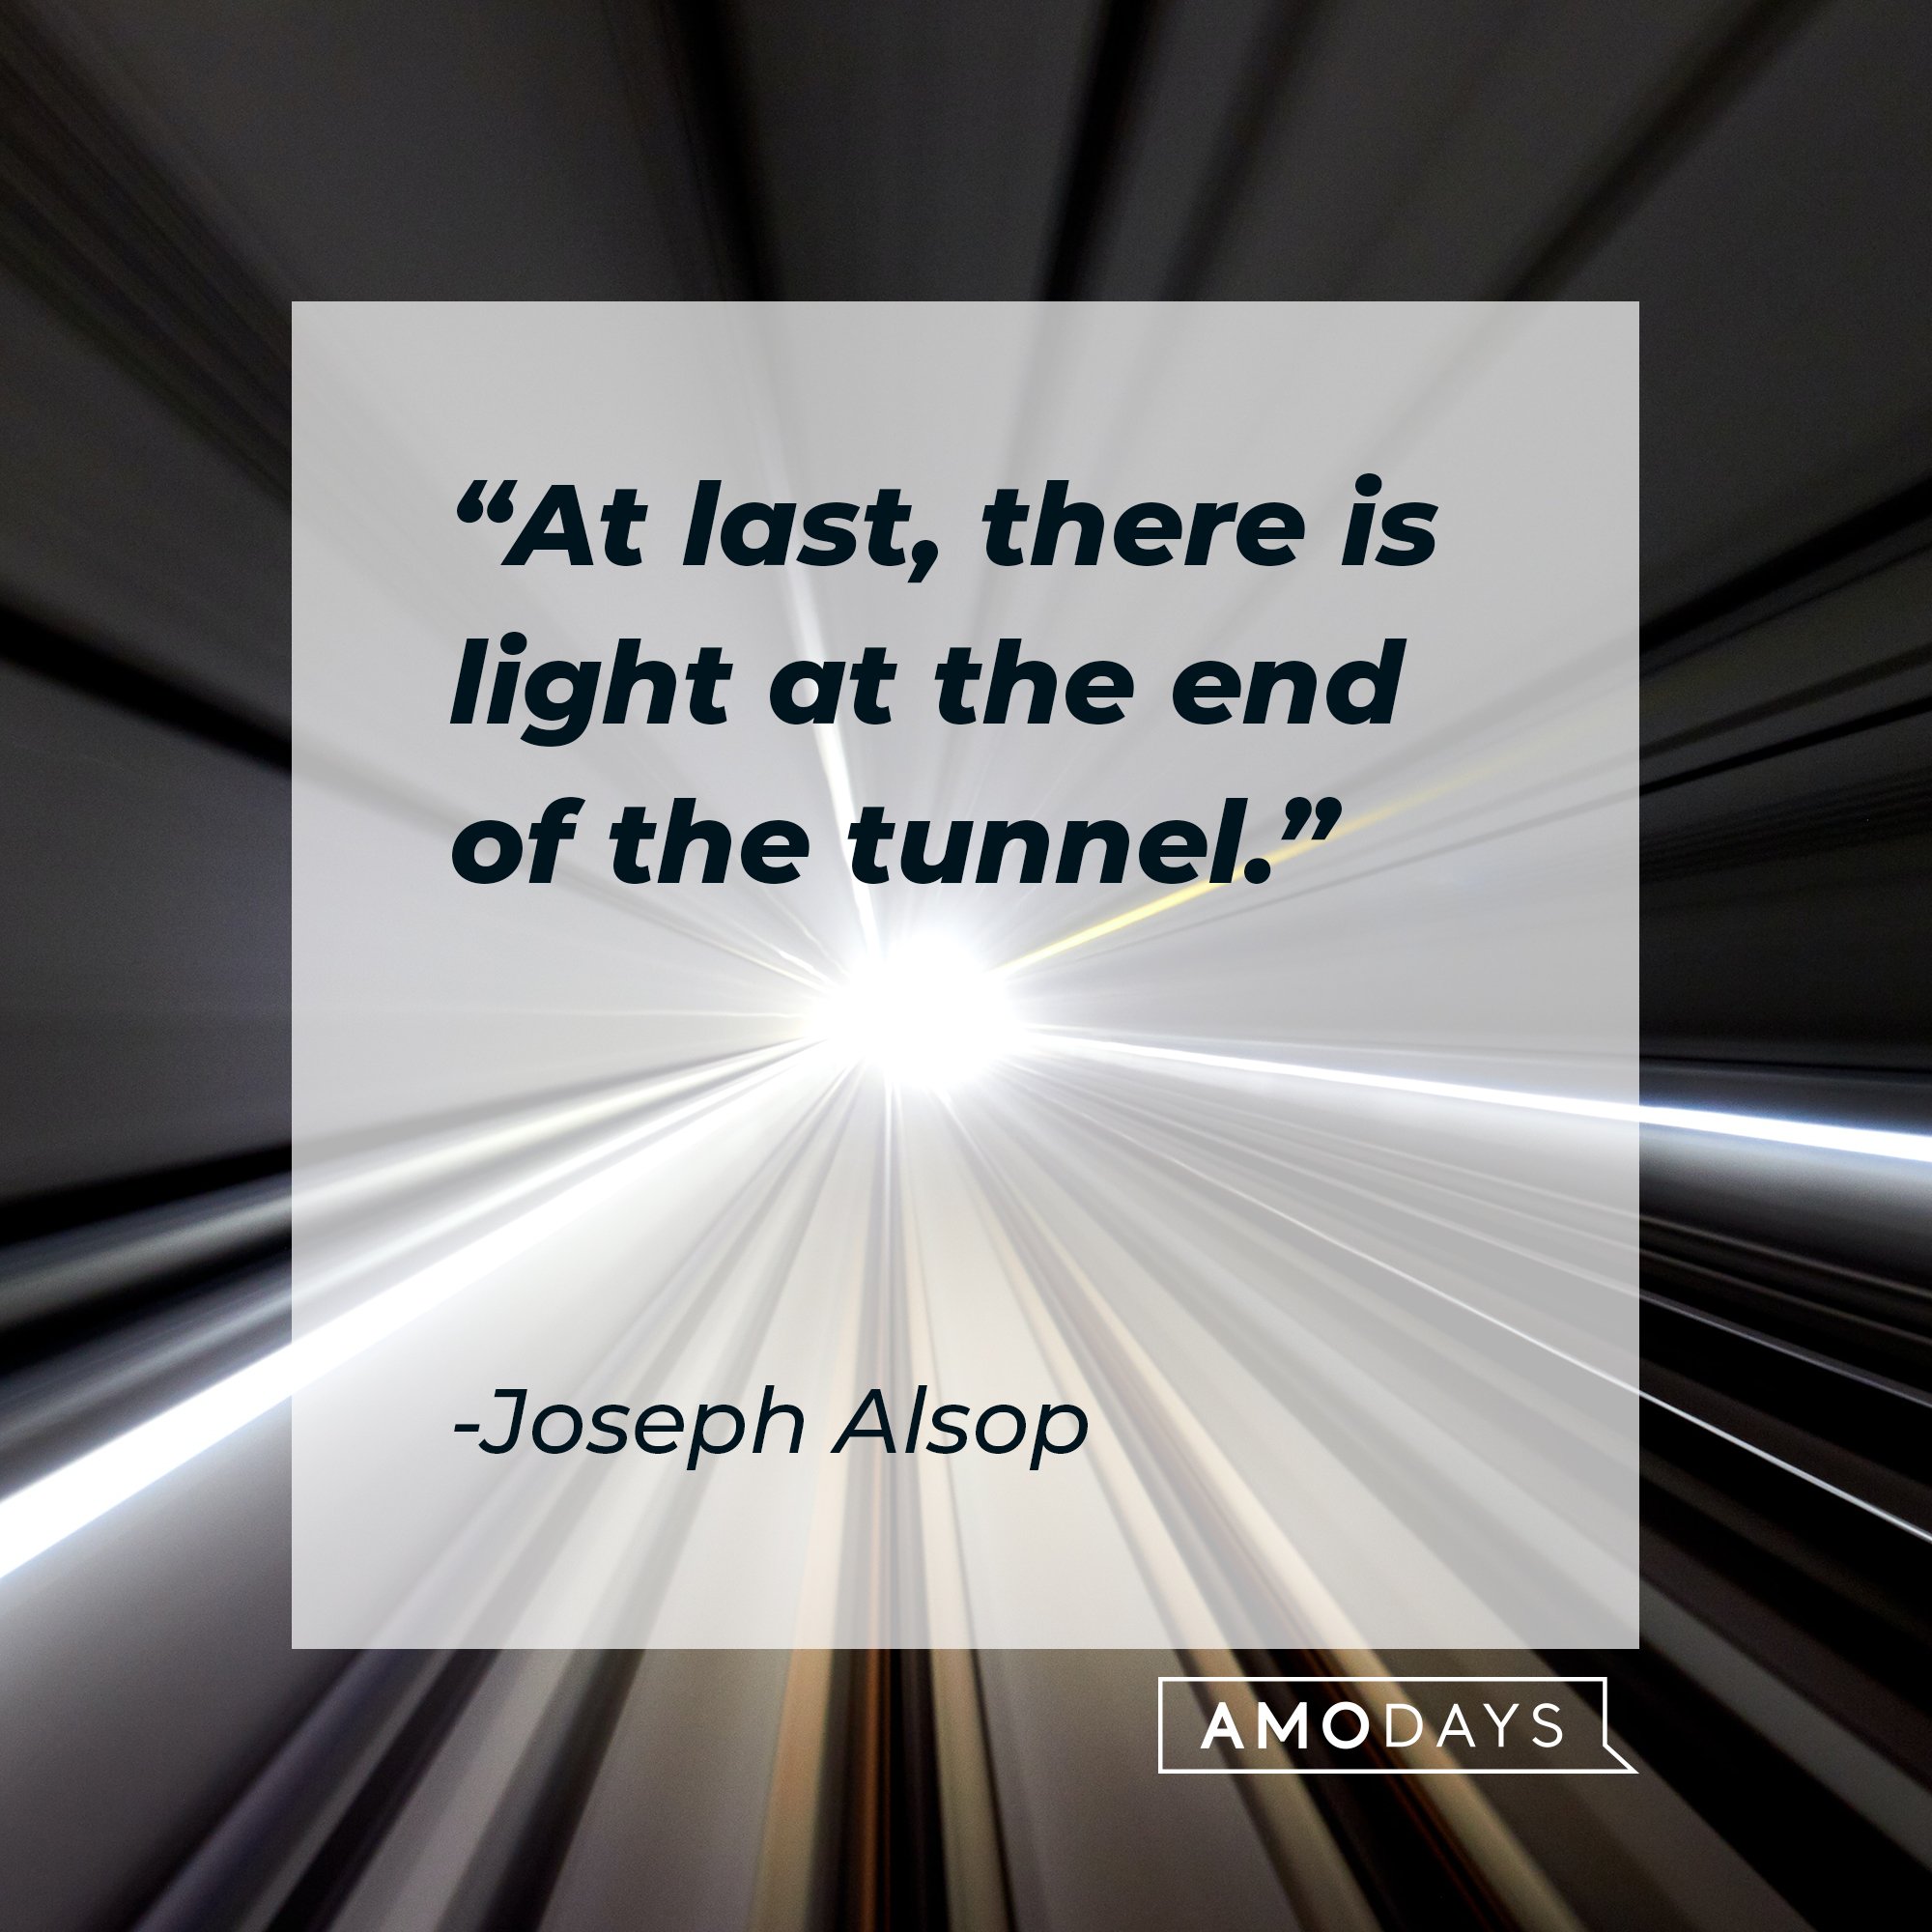 Joseph Alsop’s quote: "At last, there is light at the end of the tunnel." | Image: AmoDays